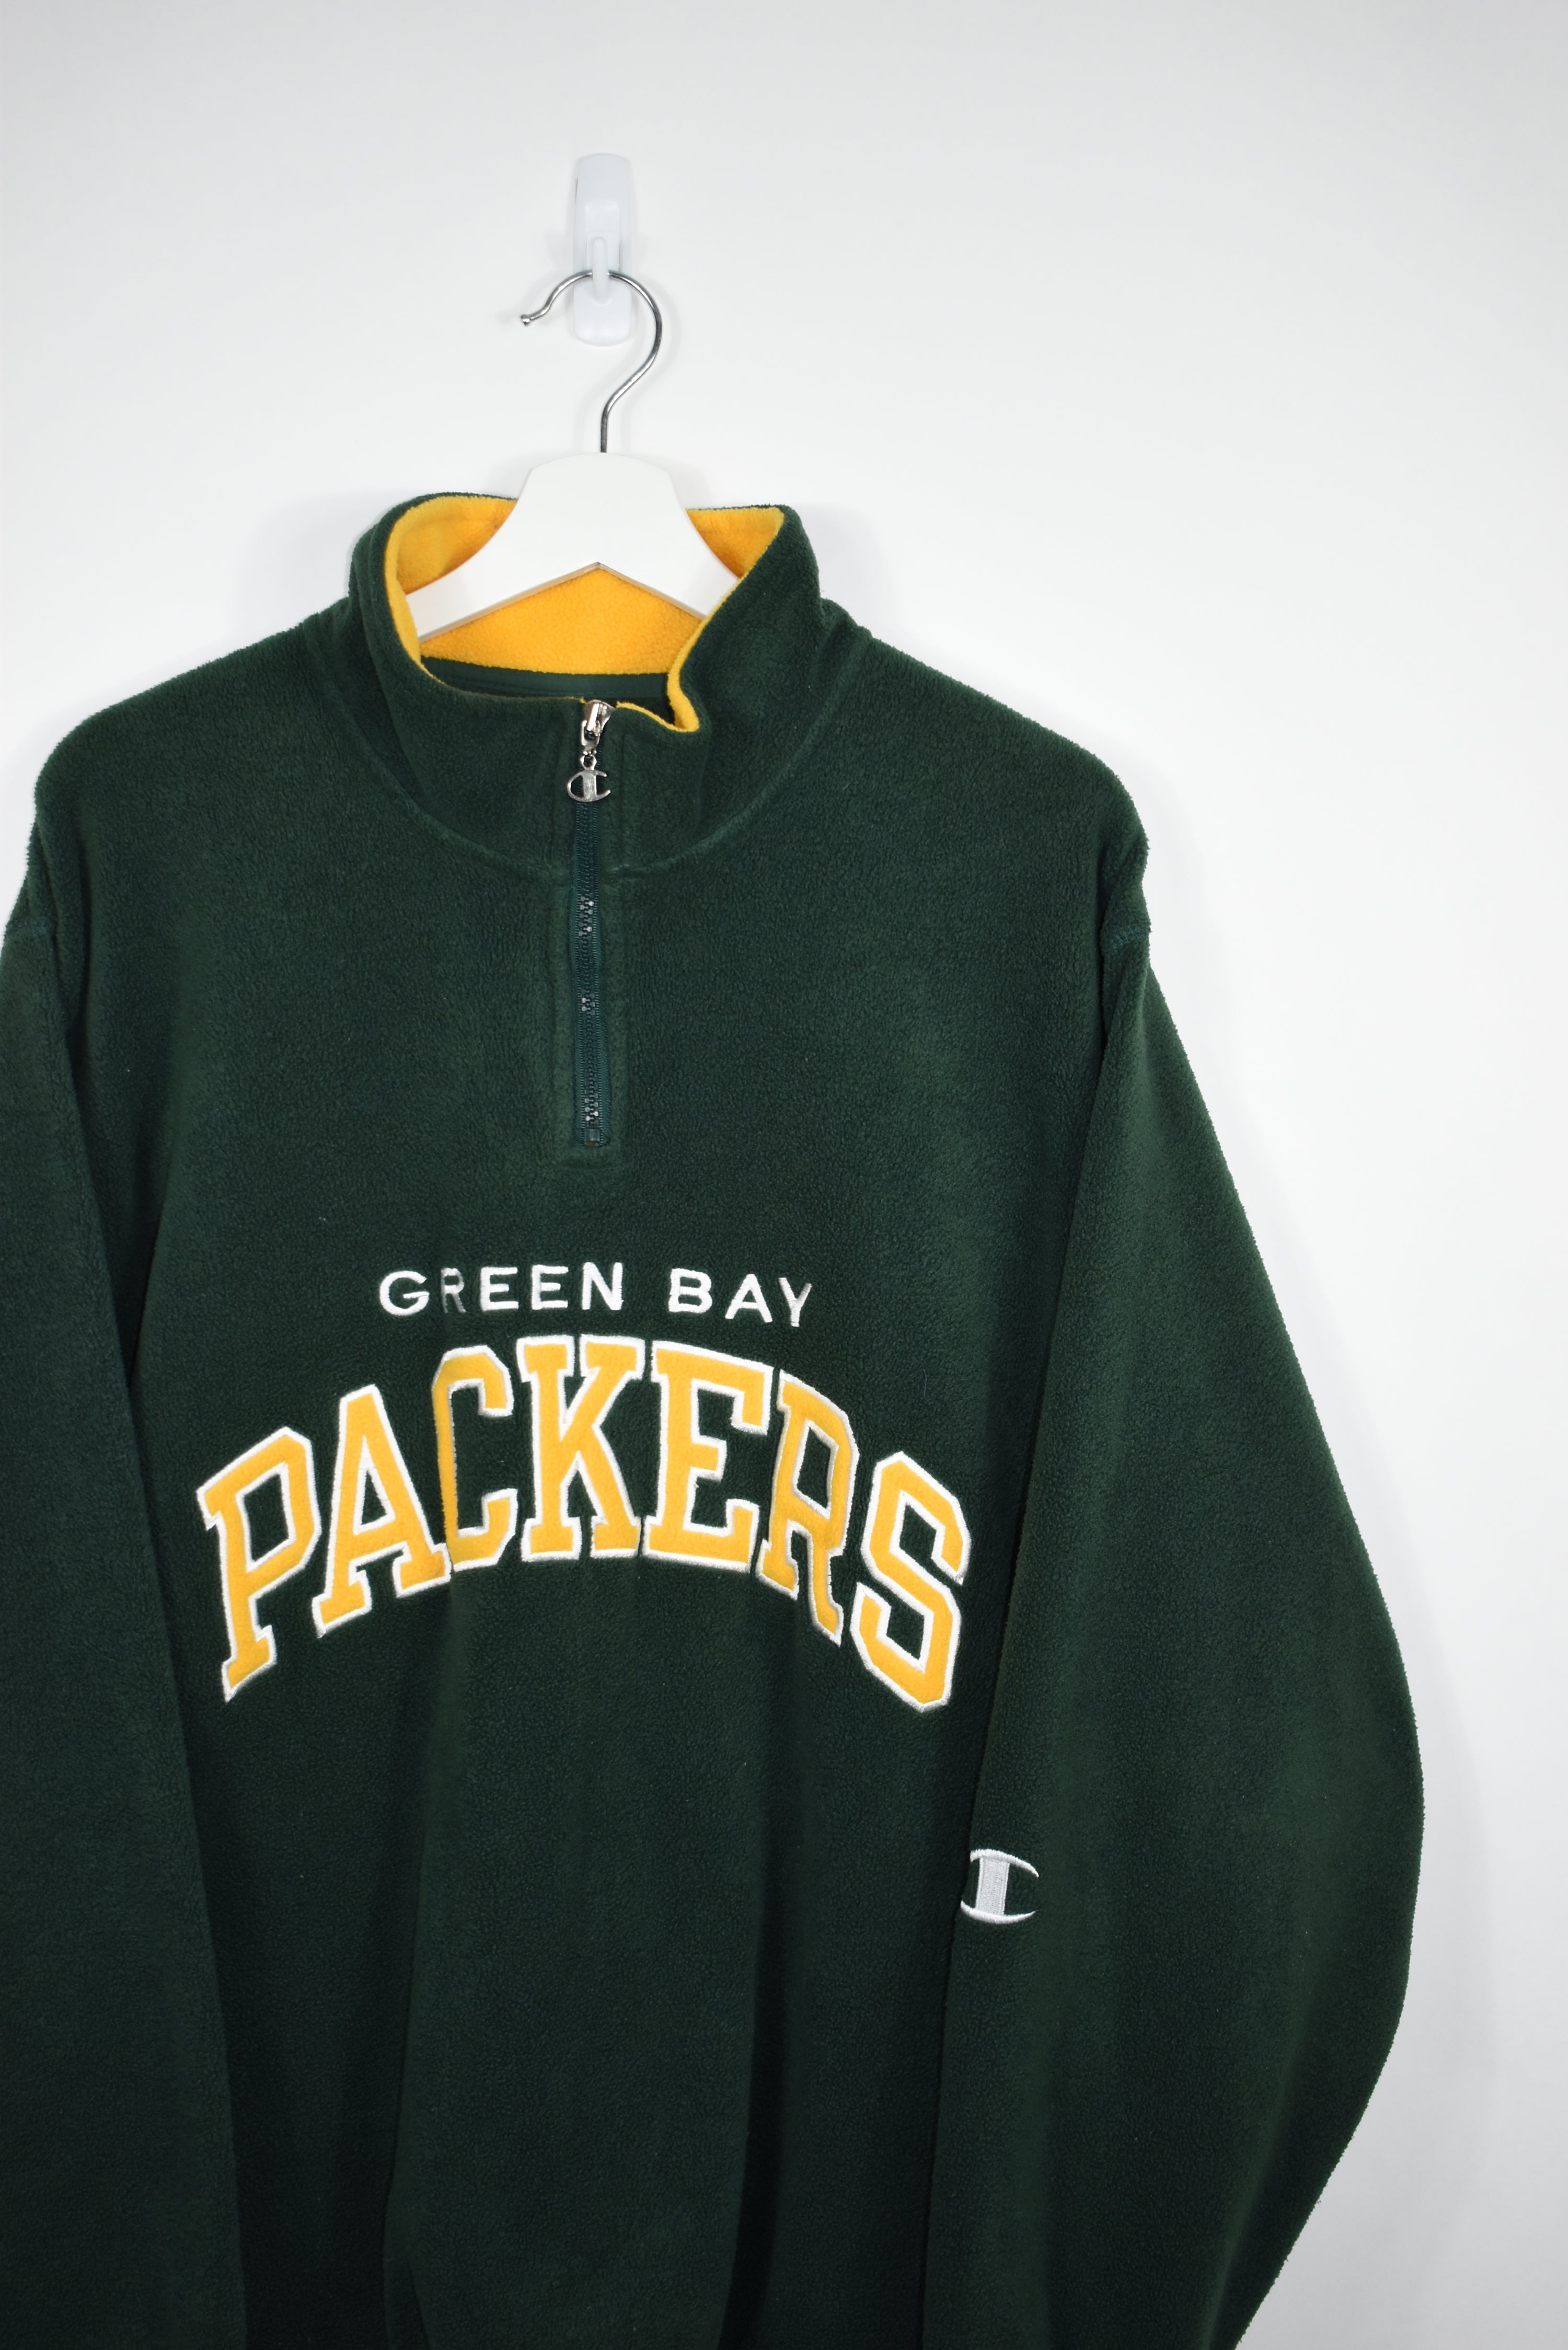 Vintage Champion Green Bay Packers Spellout Embroidered Fleece Large (Baggy)